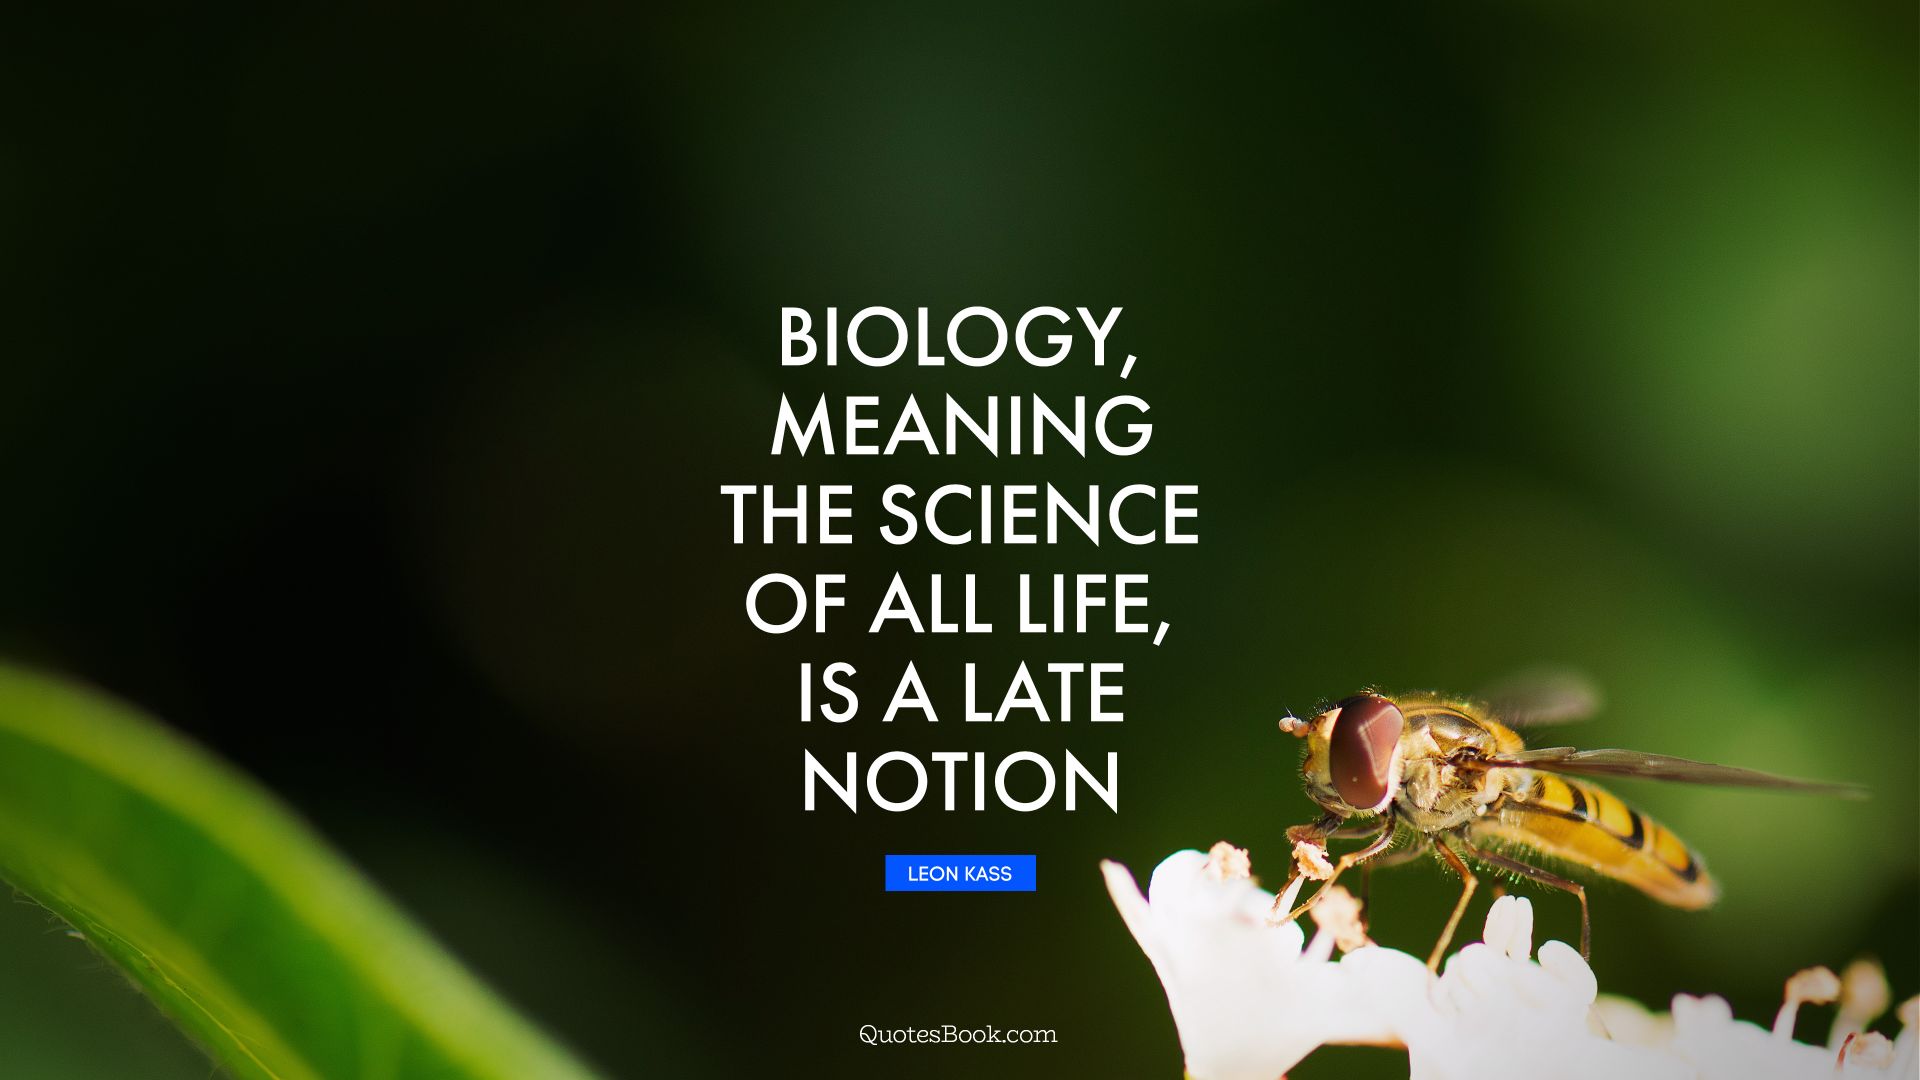 Biology, meaning the science of all life, is a late notion. - Quote by Leon Kass